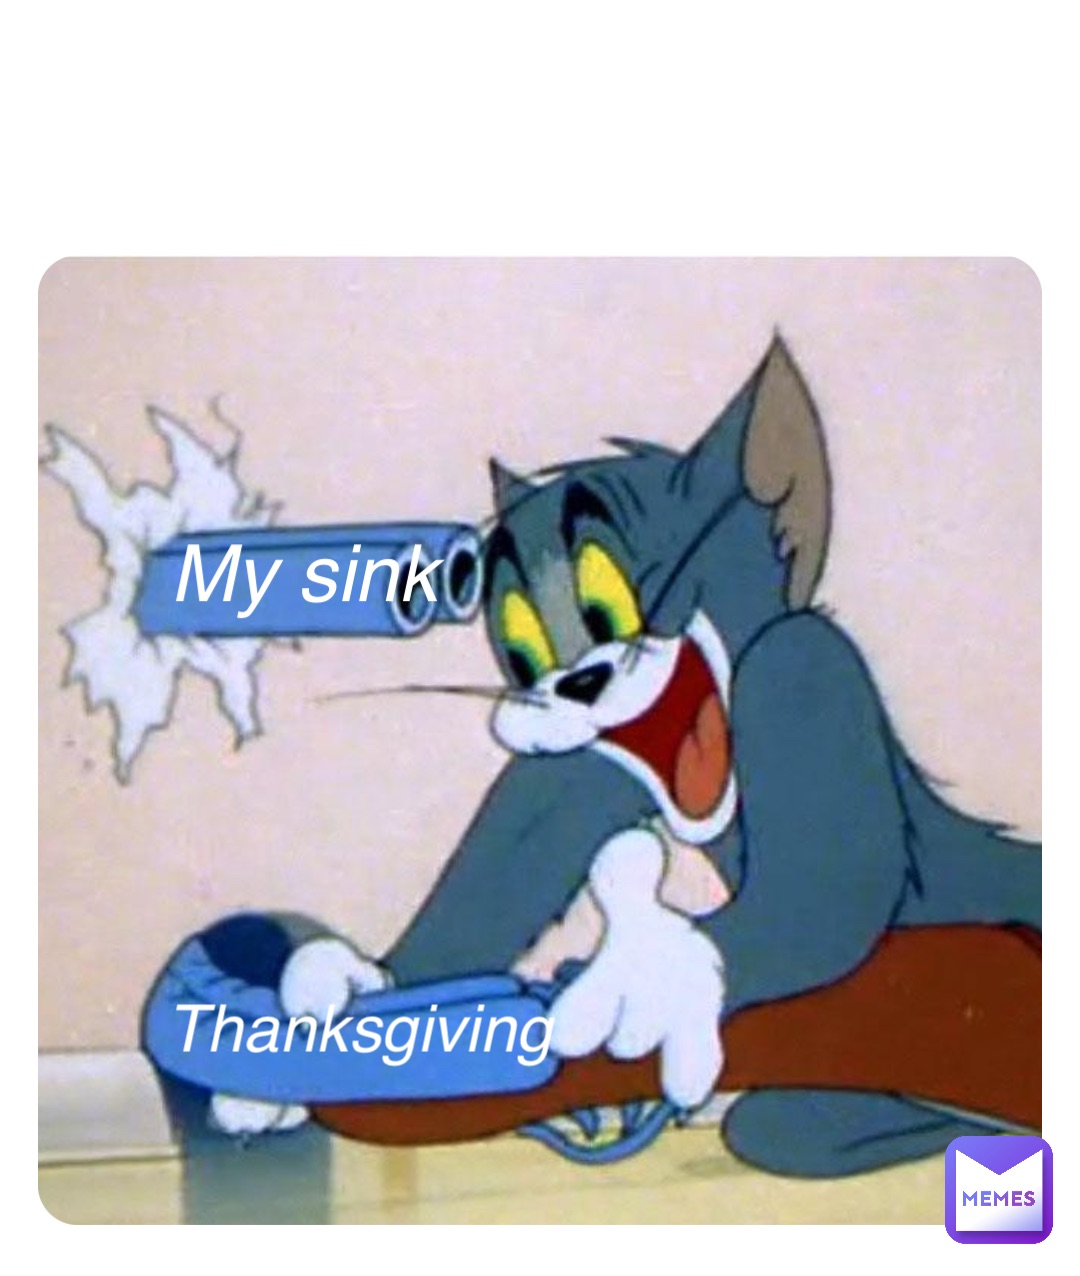 Double tap to edit Thanksgiving My sink